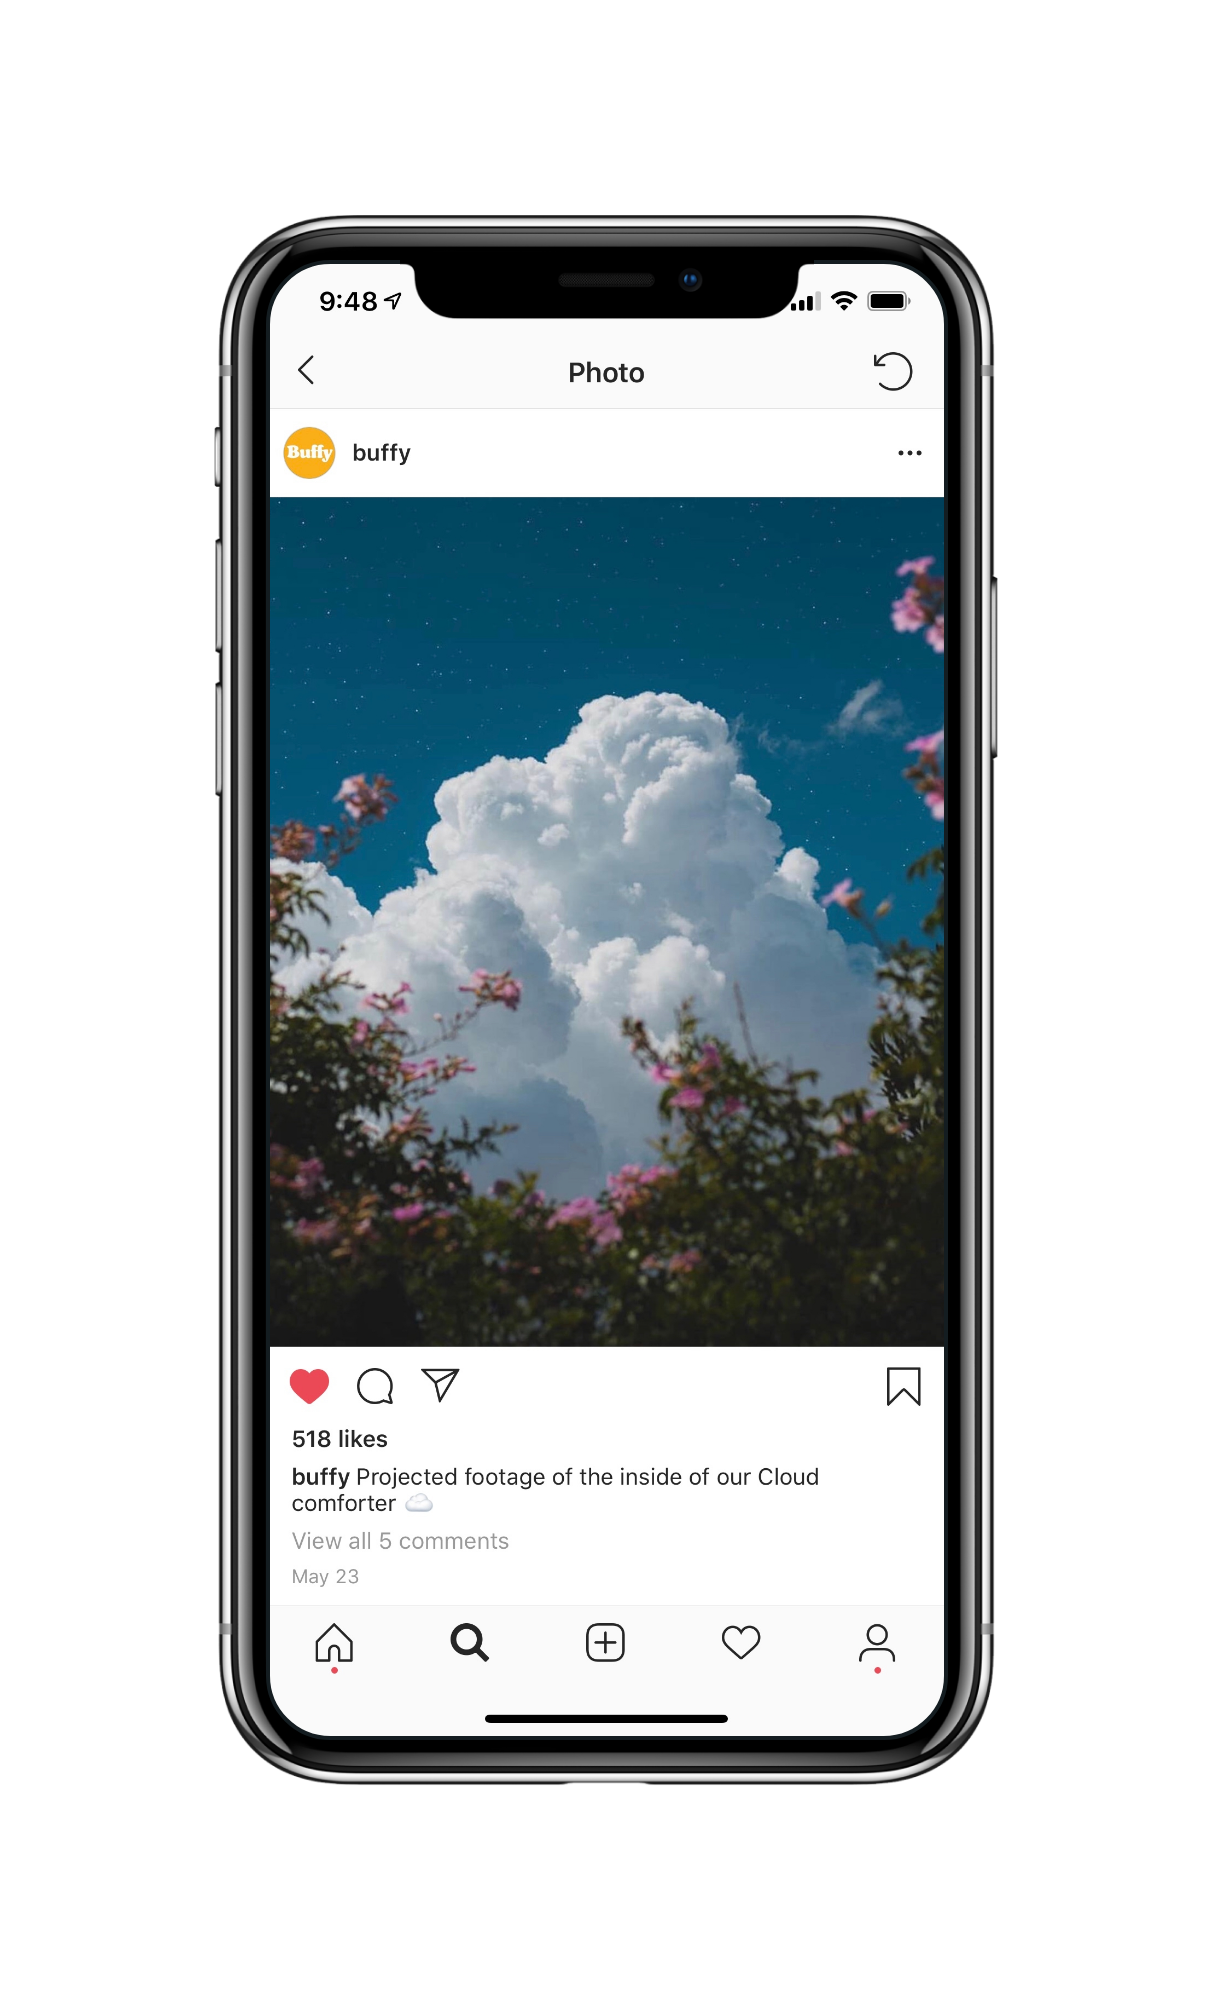 BUFFY_FINAL_FLOWERCLOUDS-iPhone X.png